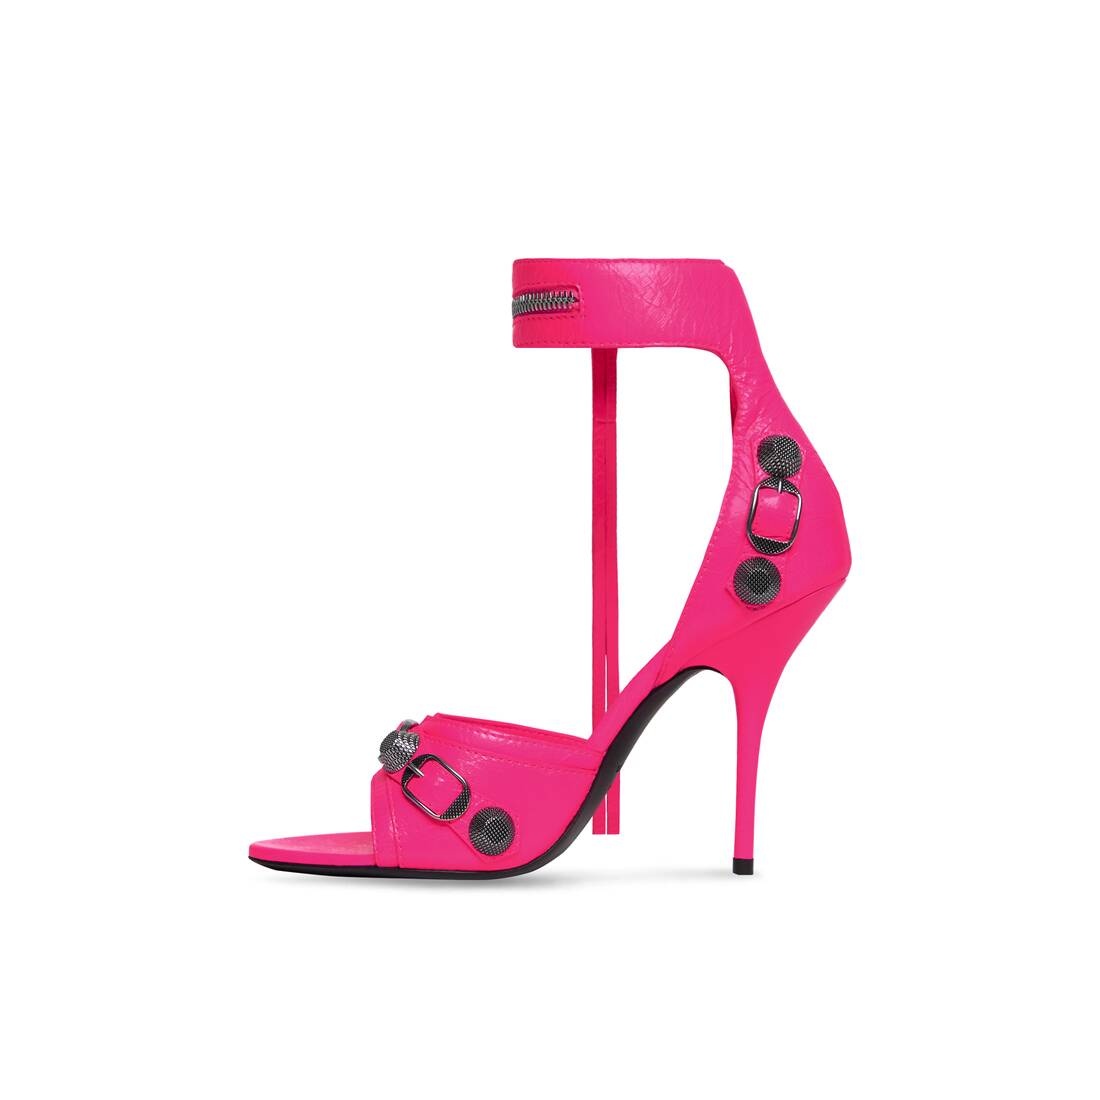 Women's Cagole 110mm Sandal  in Fluo Pink - 4